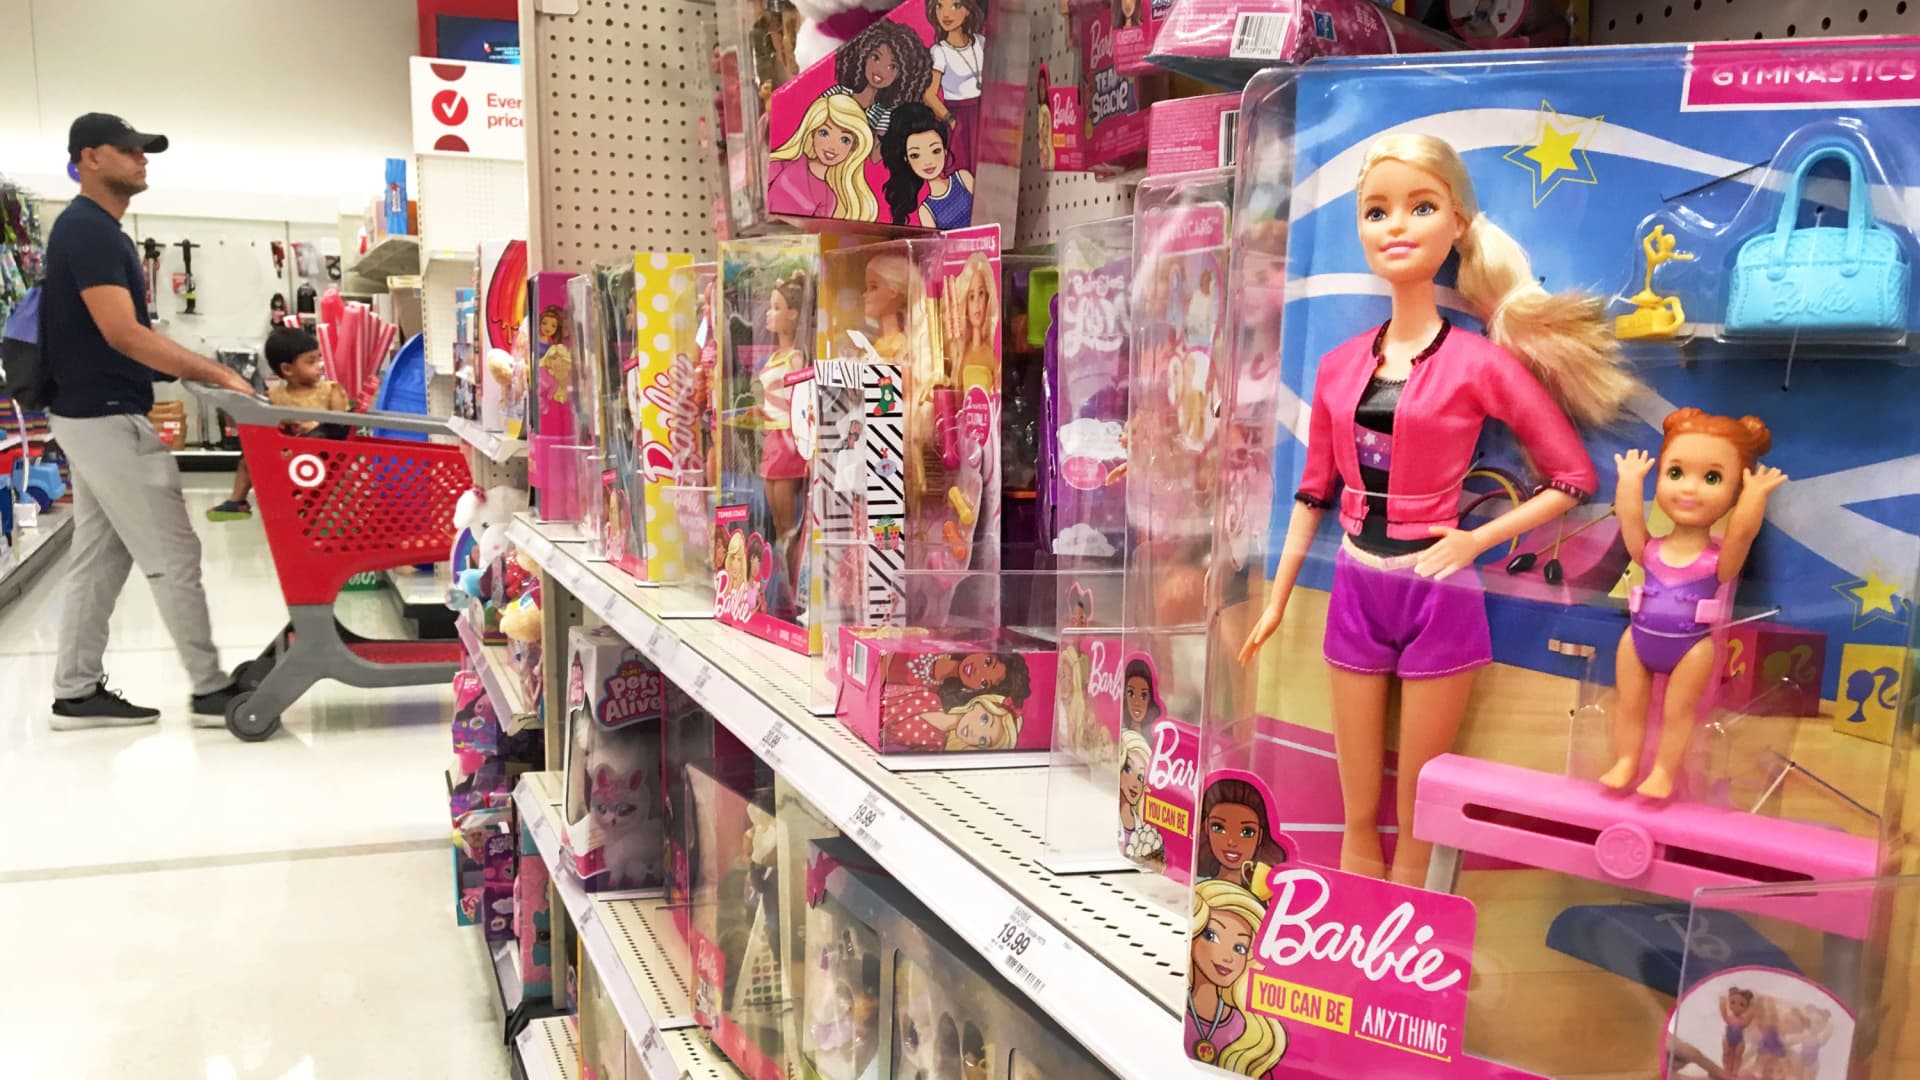 Barbie Dolls: Sales Are Booming for Mattel (MAT) During Covid-19